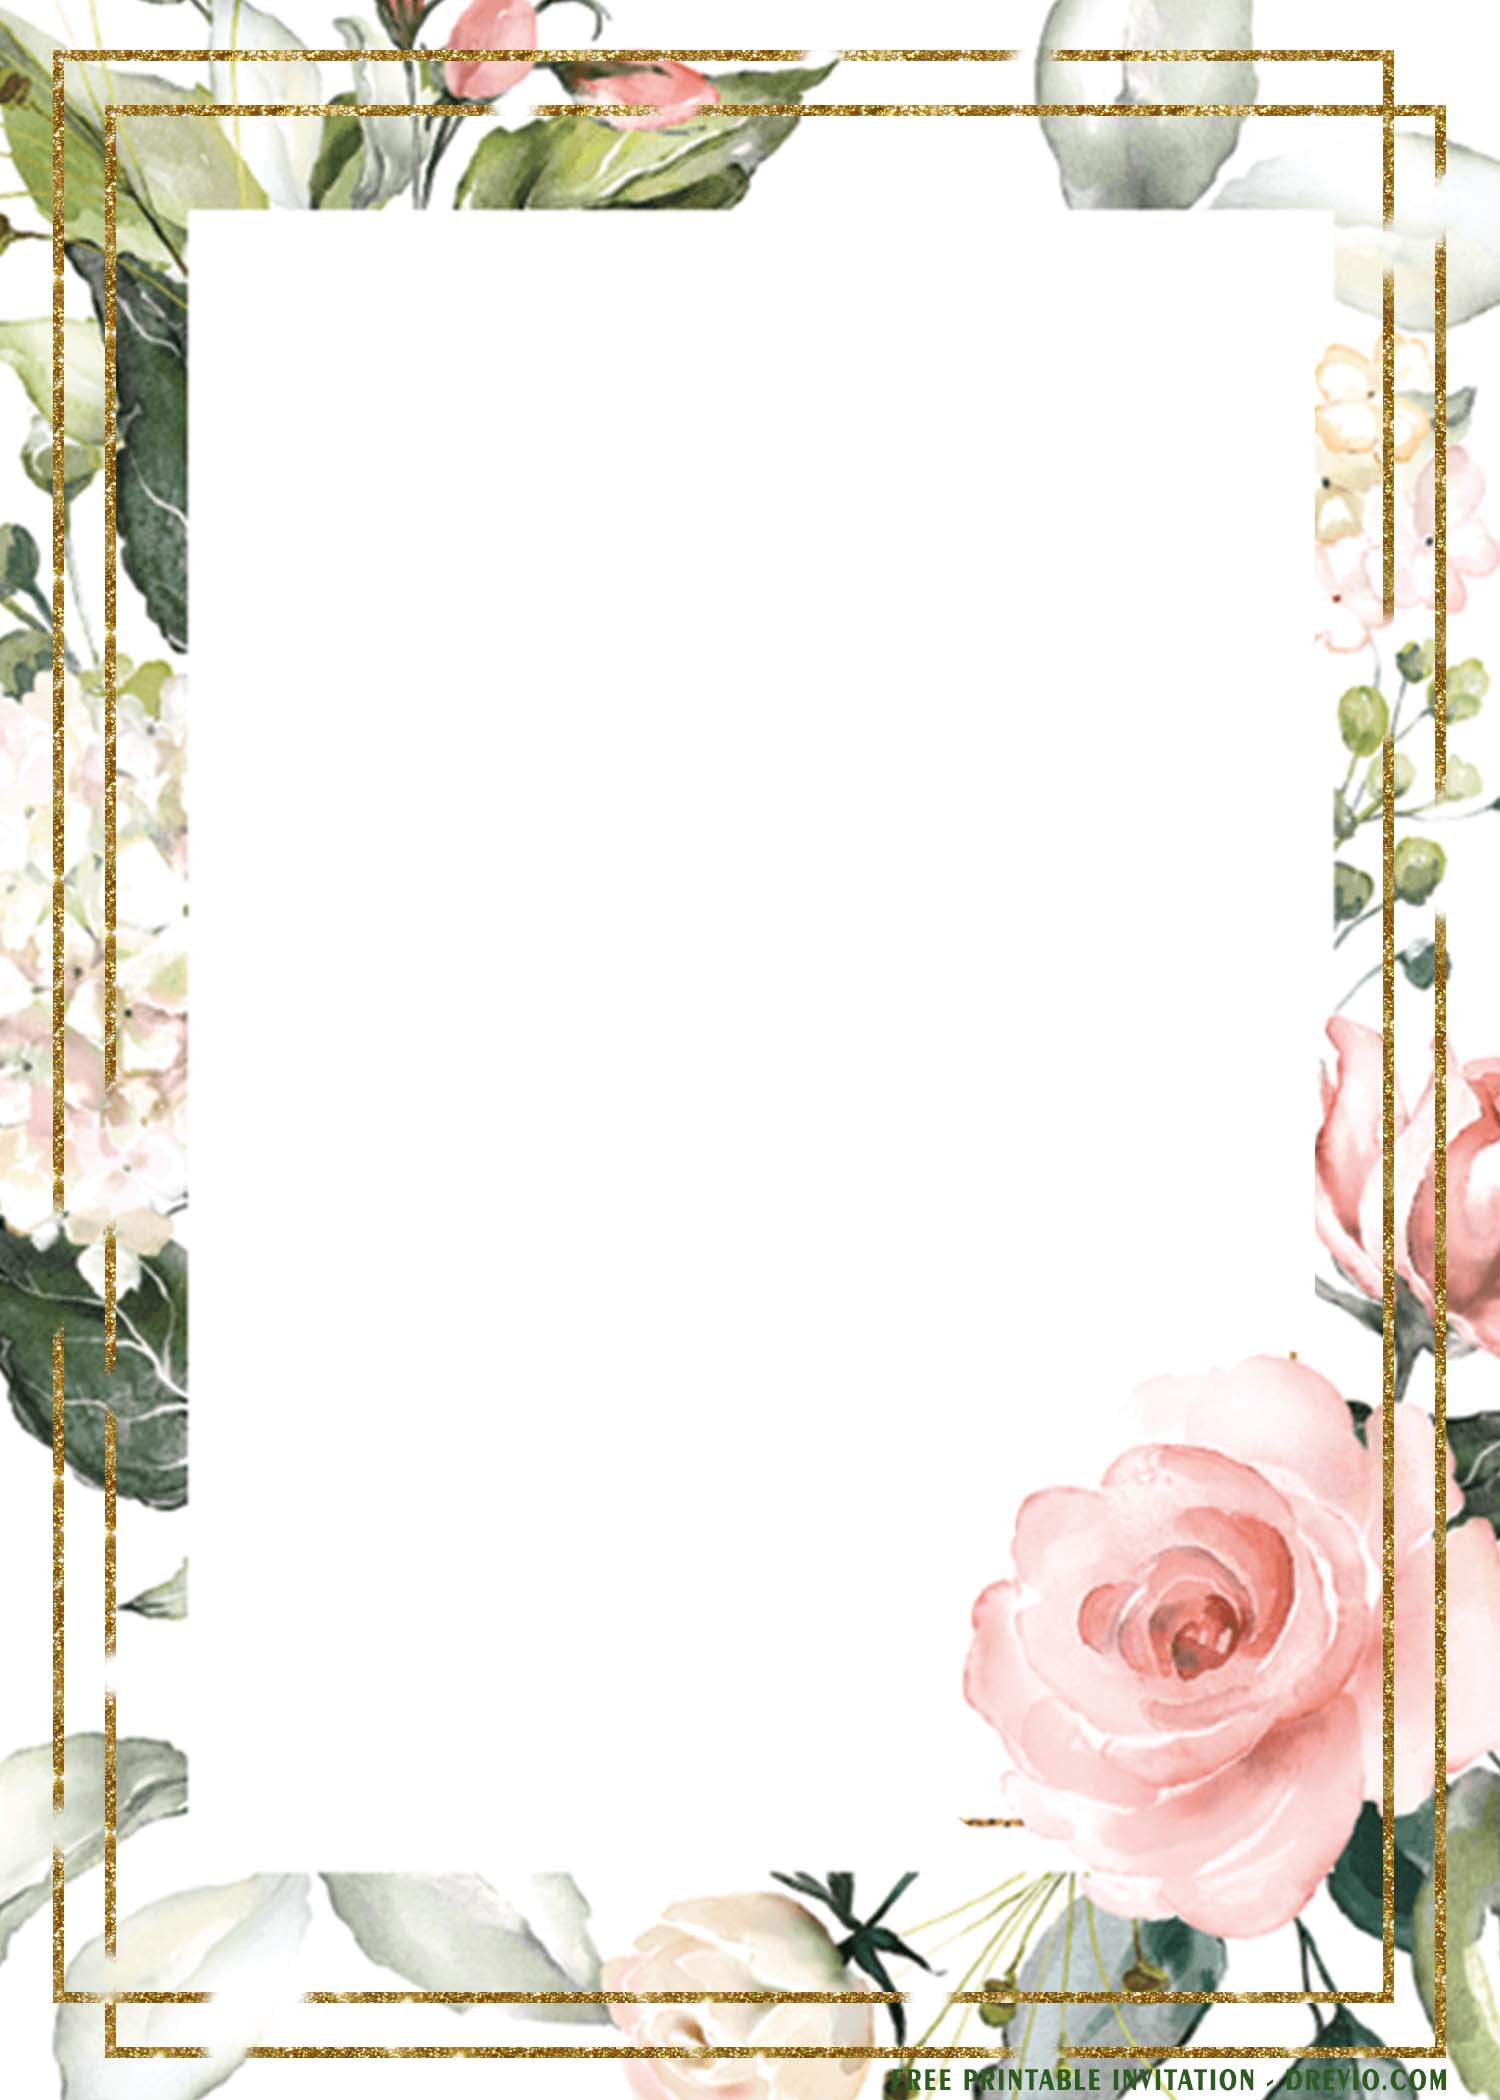 free-printable-floral-frame-invitation-templates-for-any-occasions-drevio